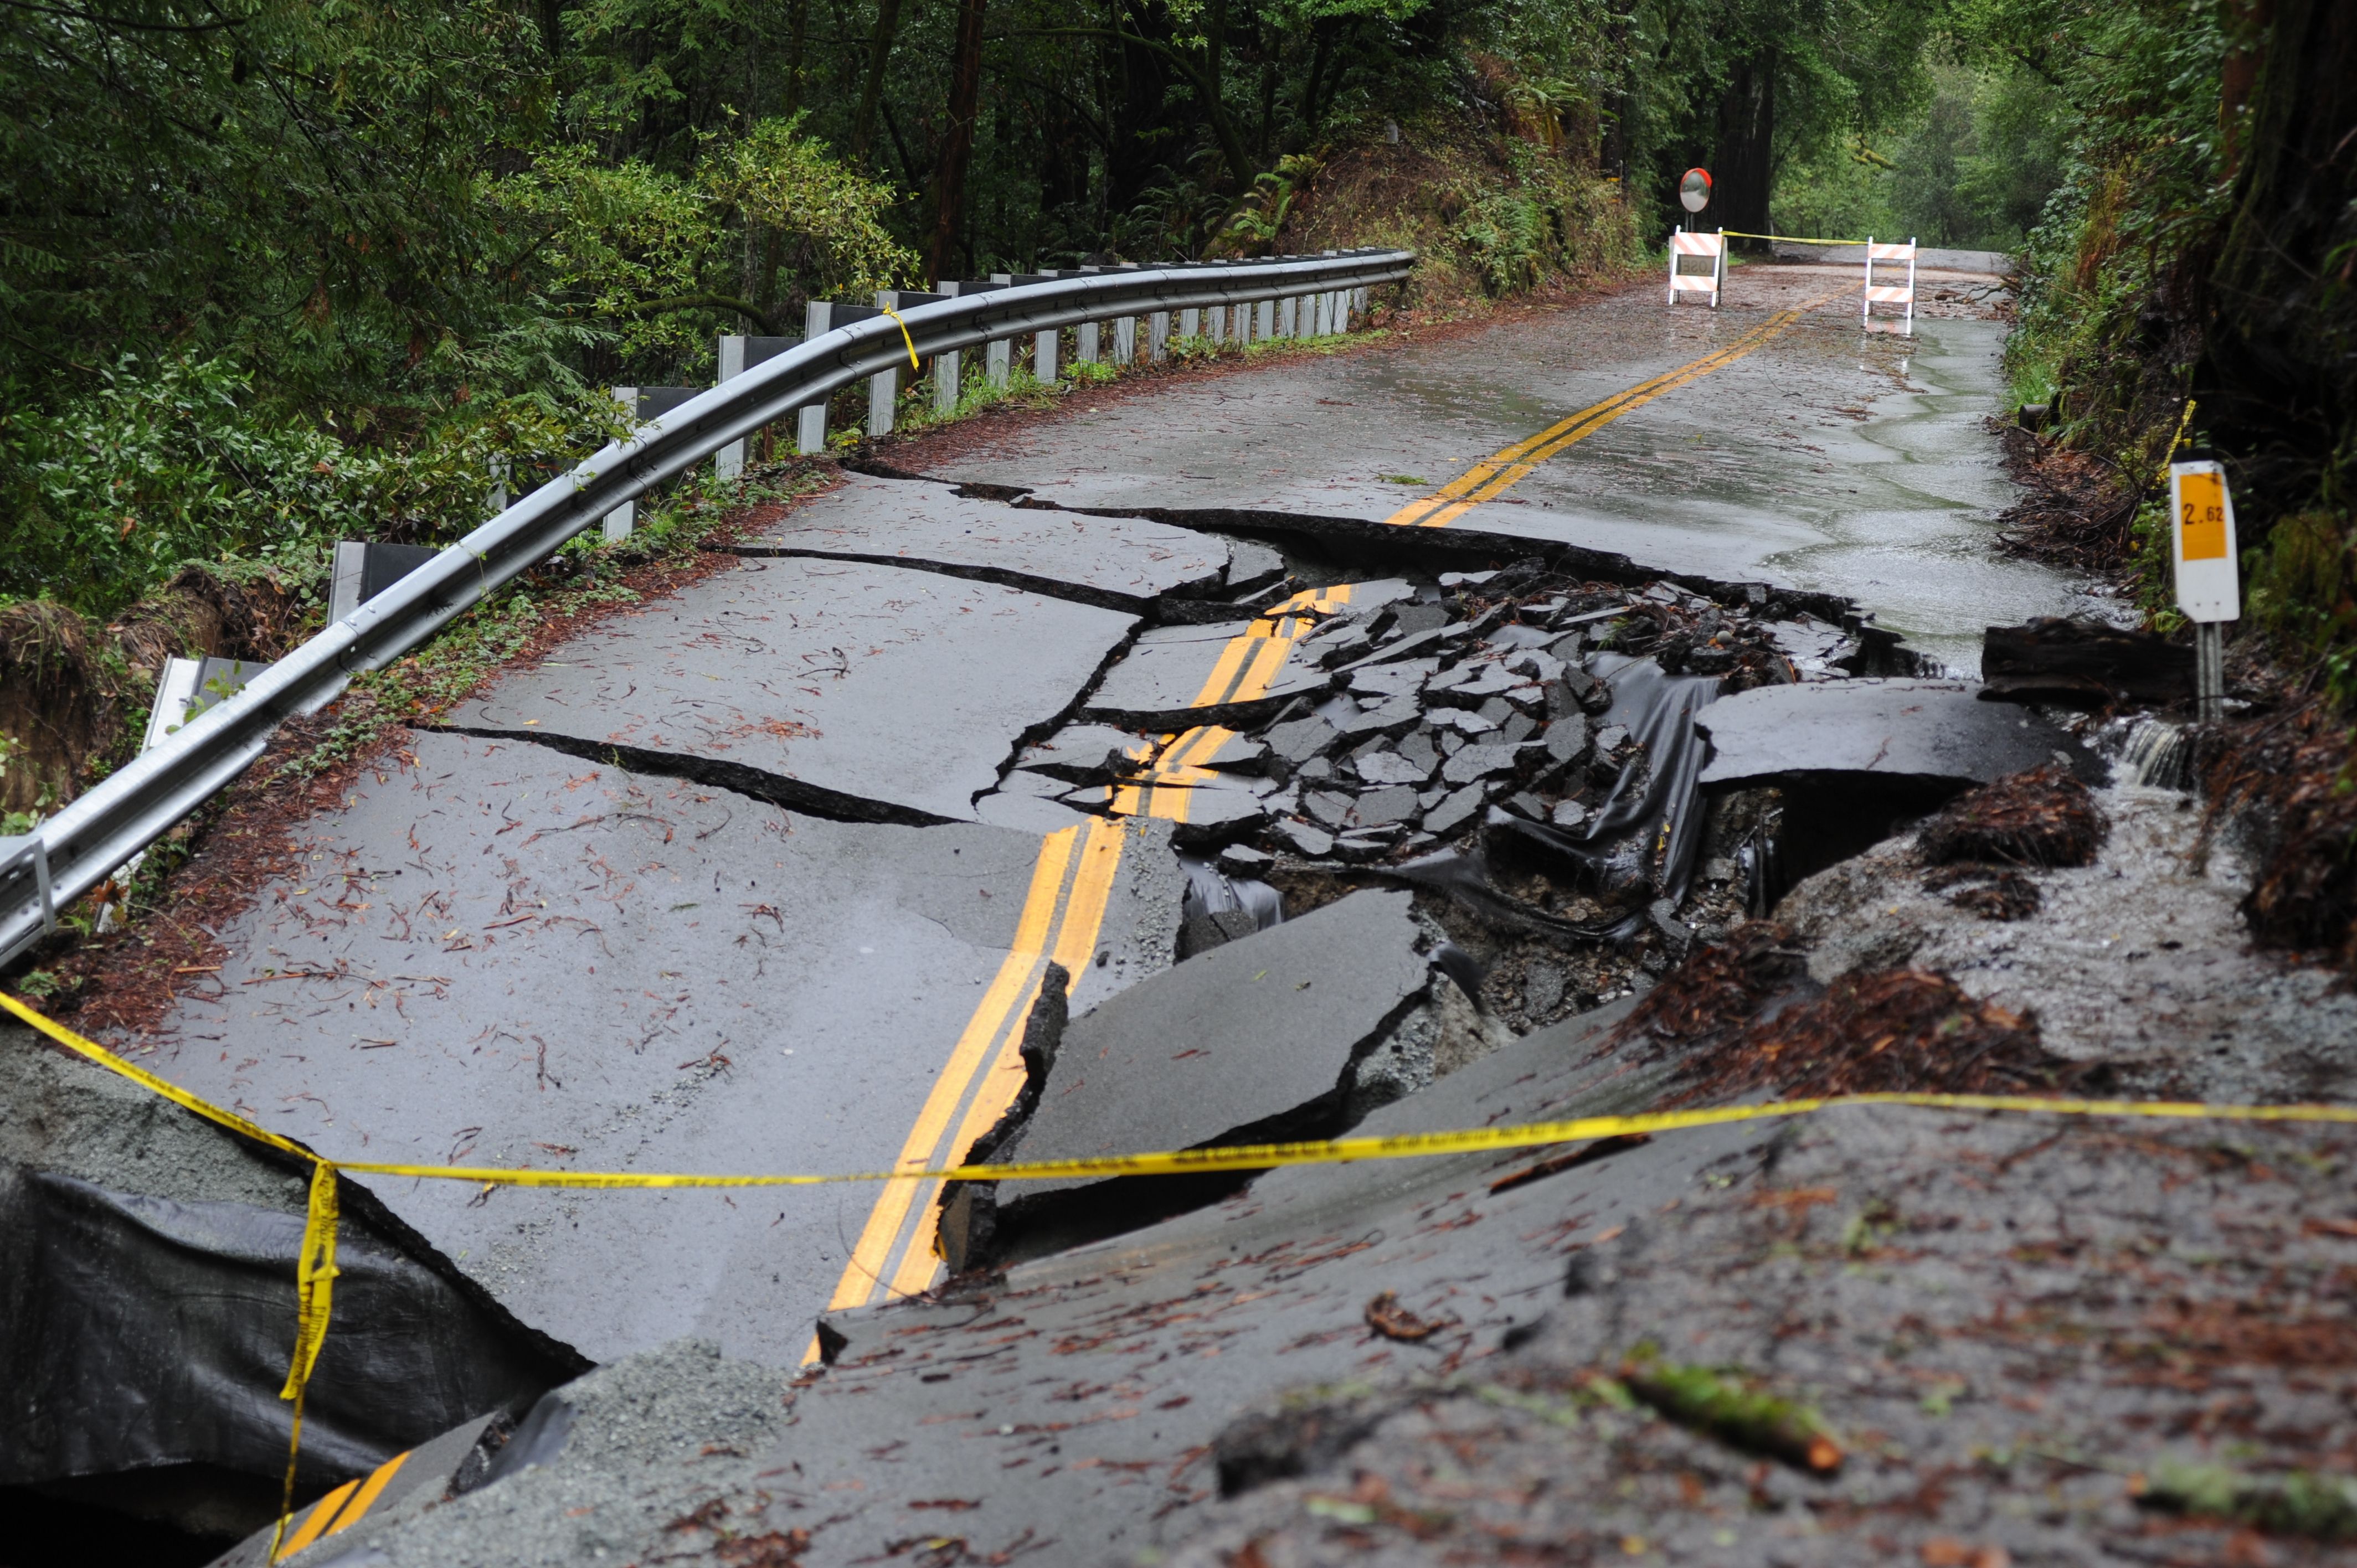 A view of damage on the road after storm and heavy rain in the Santa Cruz Mountains above Silicon Valley in Scotts Valley, California, United States on January 09.